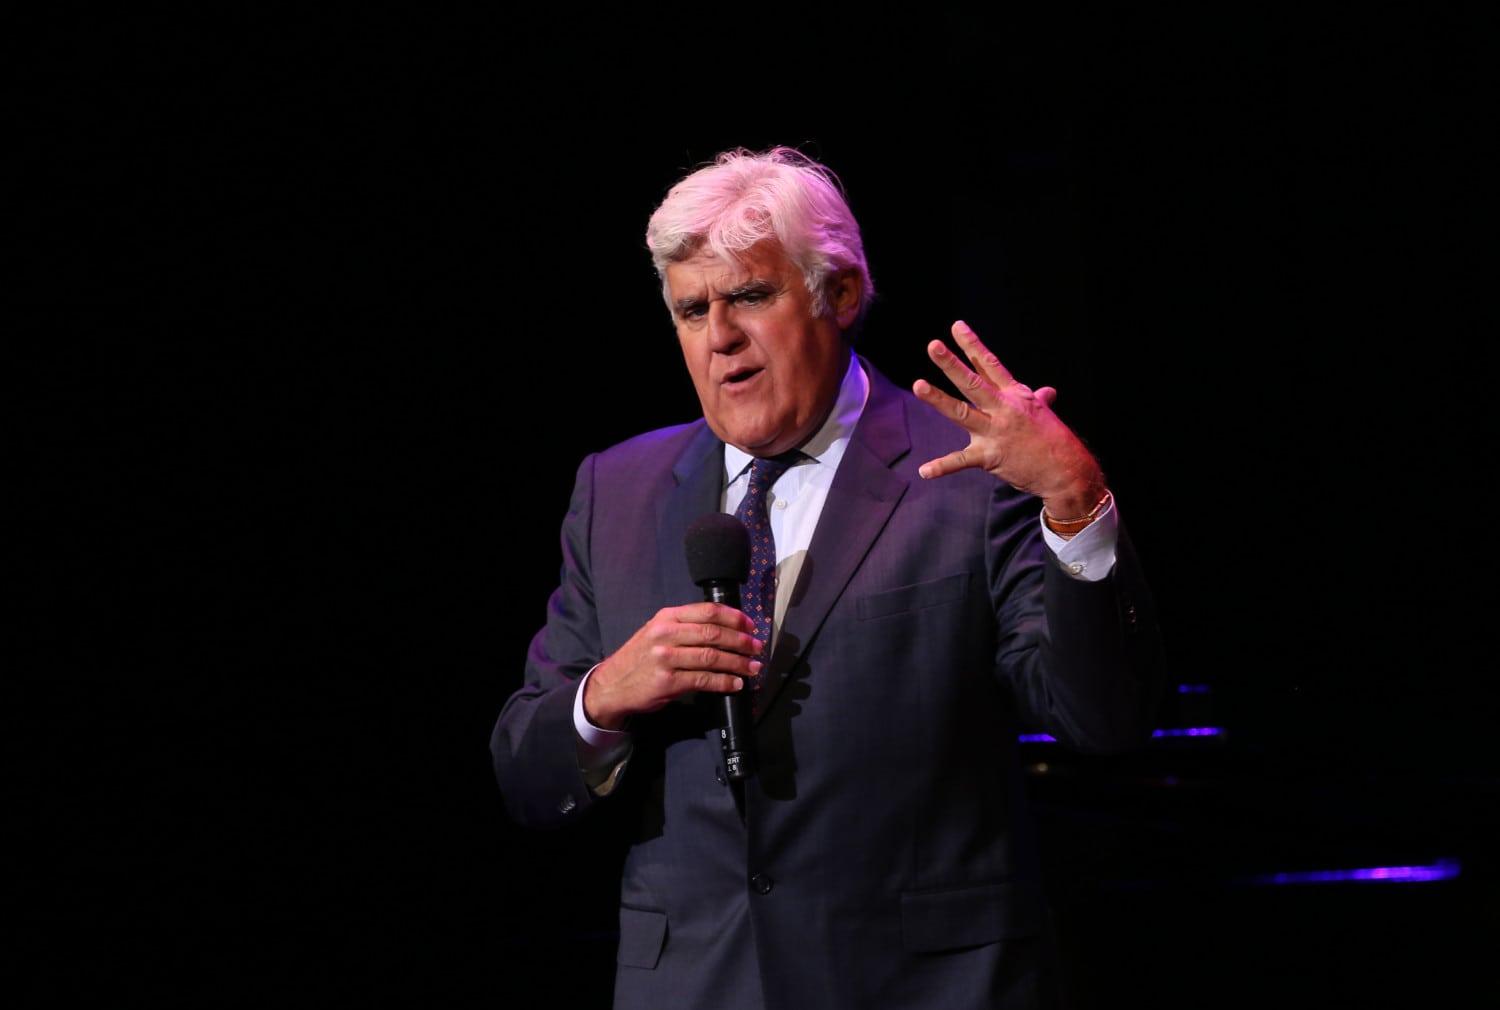 Jay Leno: Though He's Wealthy, He Lives Very Frugally